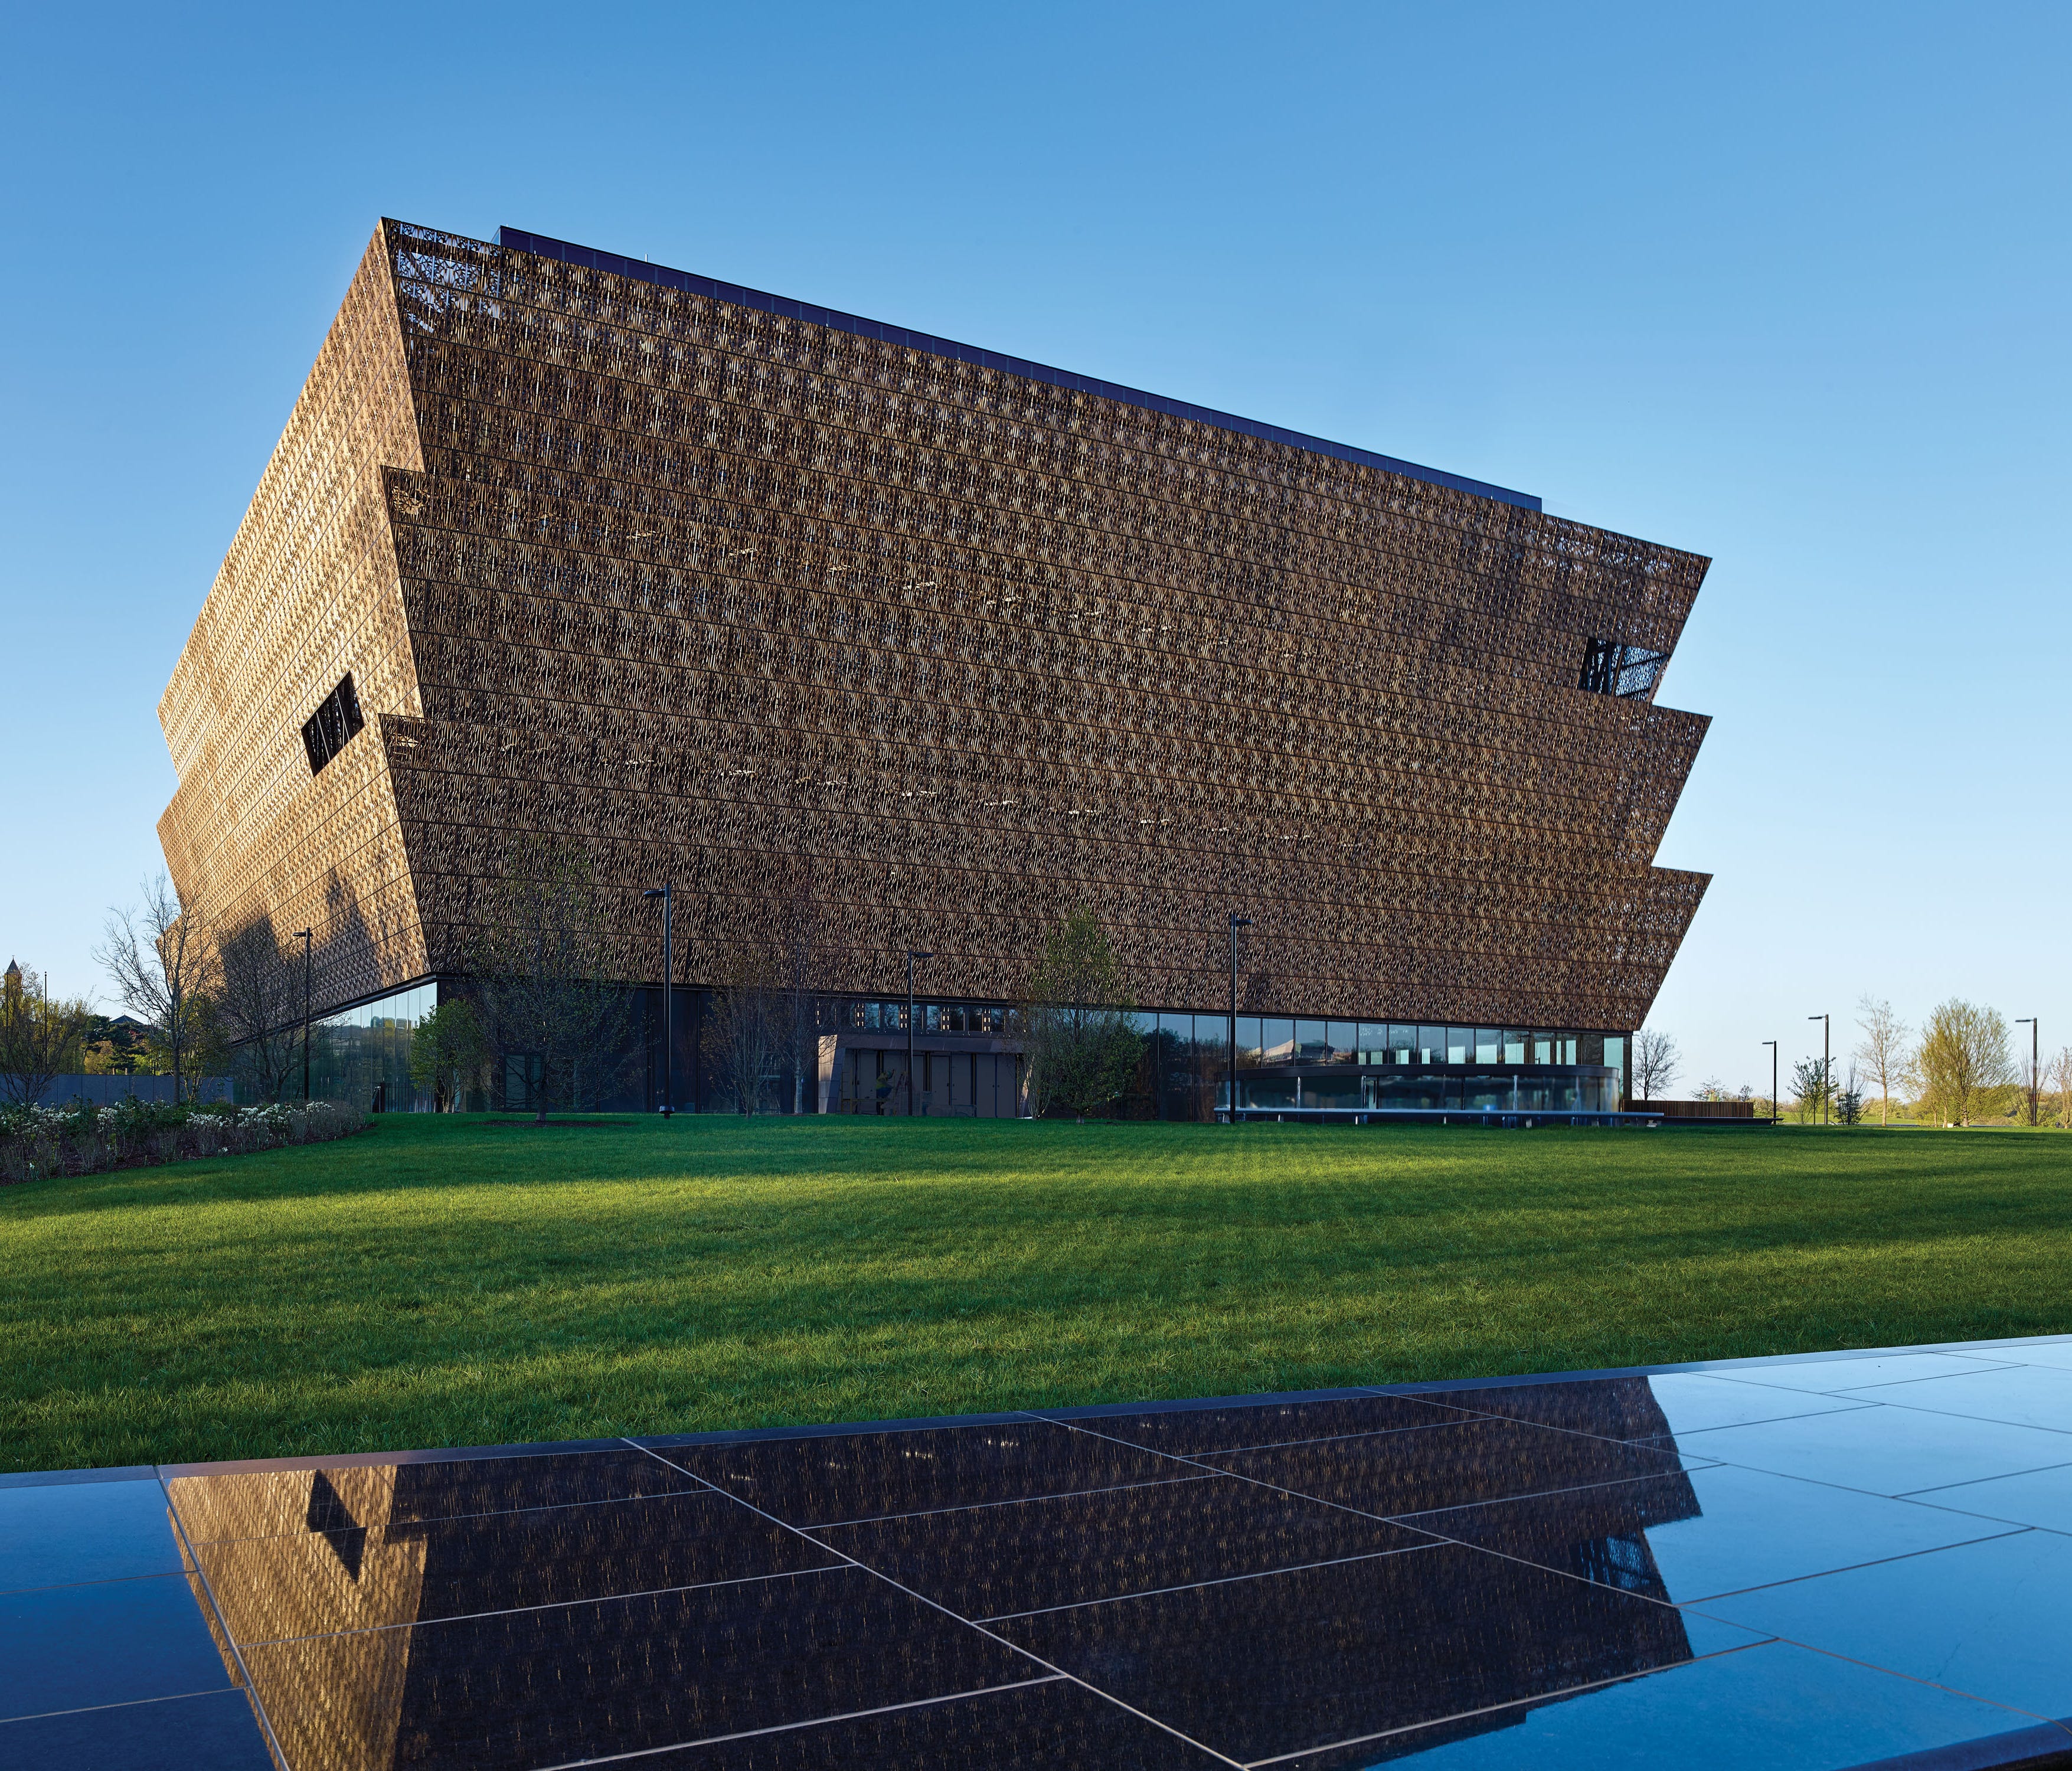 The National Museum of African American History and Culture, part of the Smithsonian Institution, has had more than 3.5 million visitors since opening in September 2016.